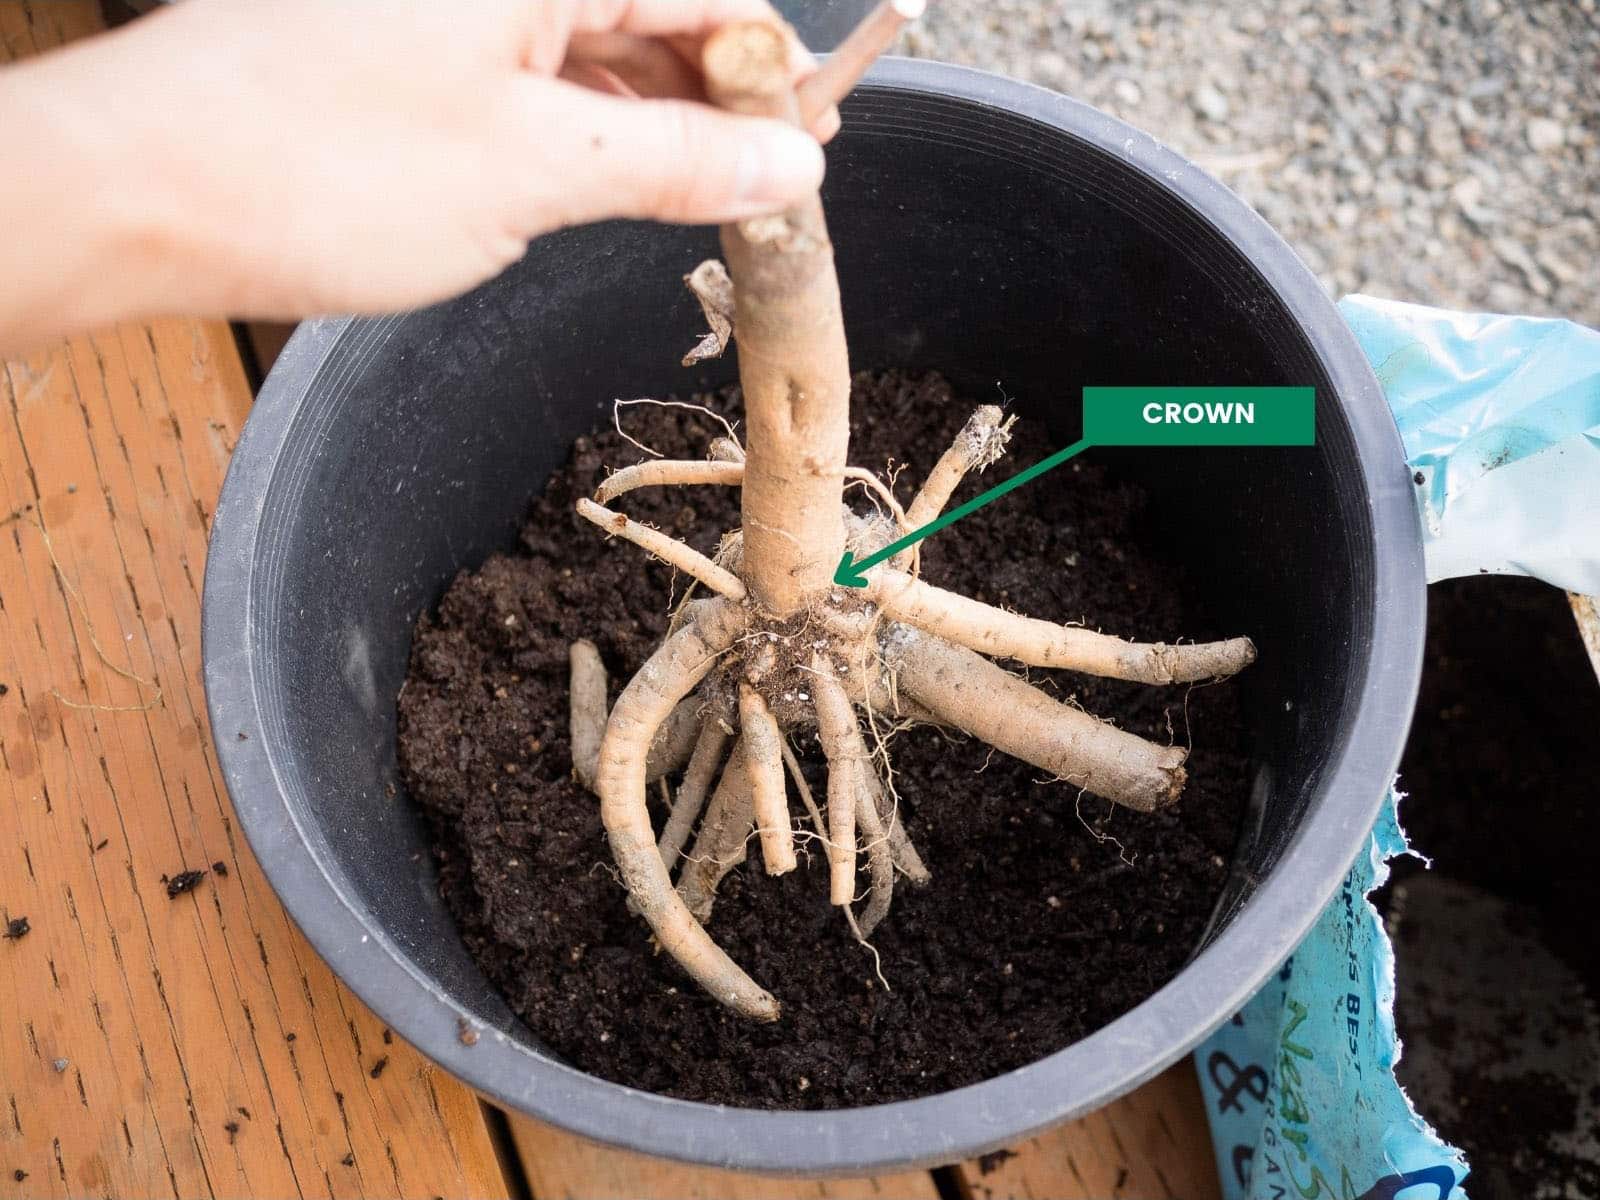 Hand holding a bare-root hardy hibiscus plant above soil to gauge how deep it should be planted in a black plastic nursery pot; a callout with an arrow indicates where the crown is